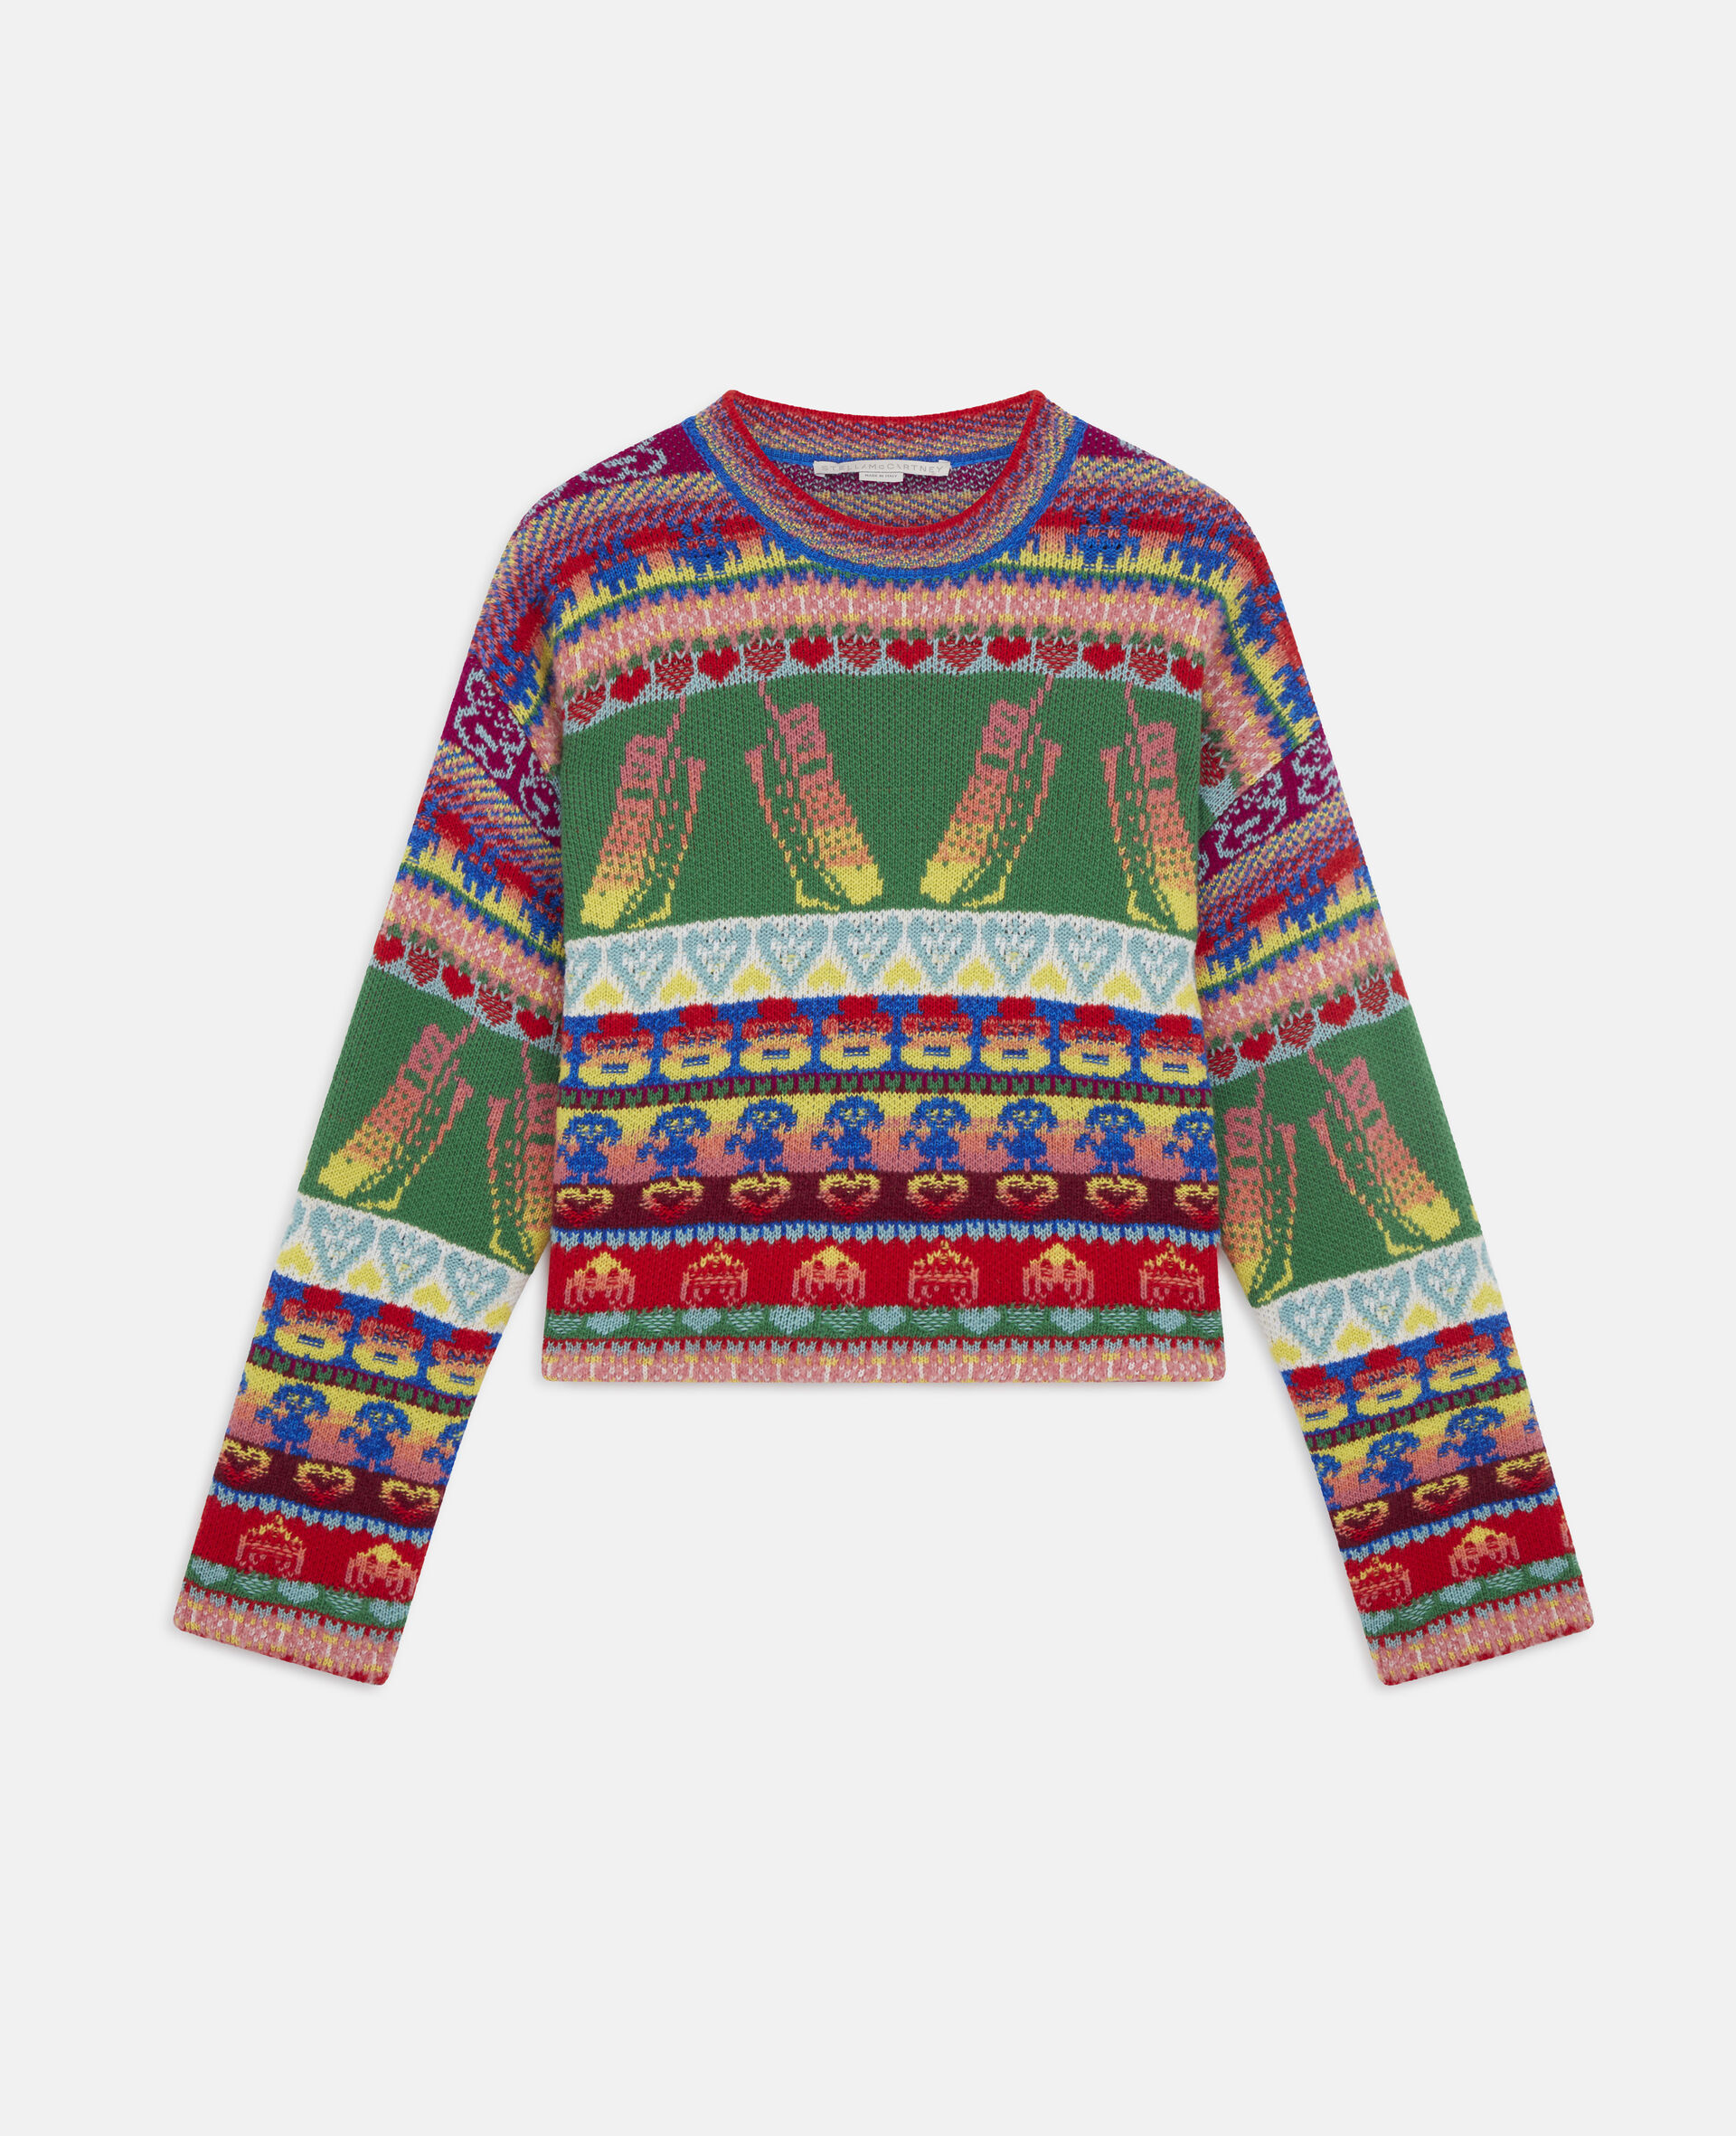 Keep In Touch' Cropped Sweater-Multicoloured-large